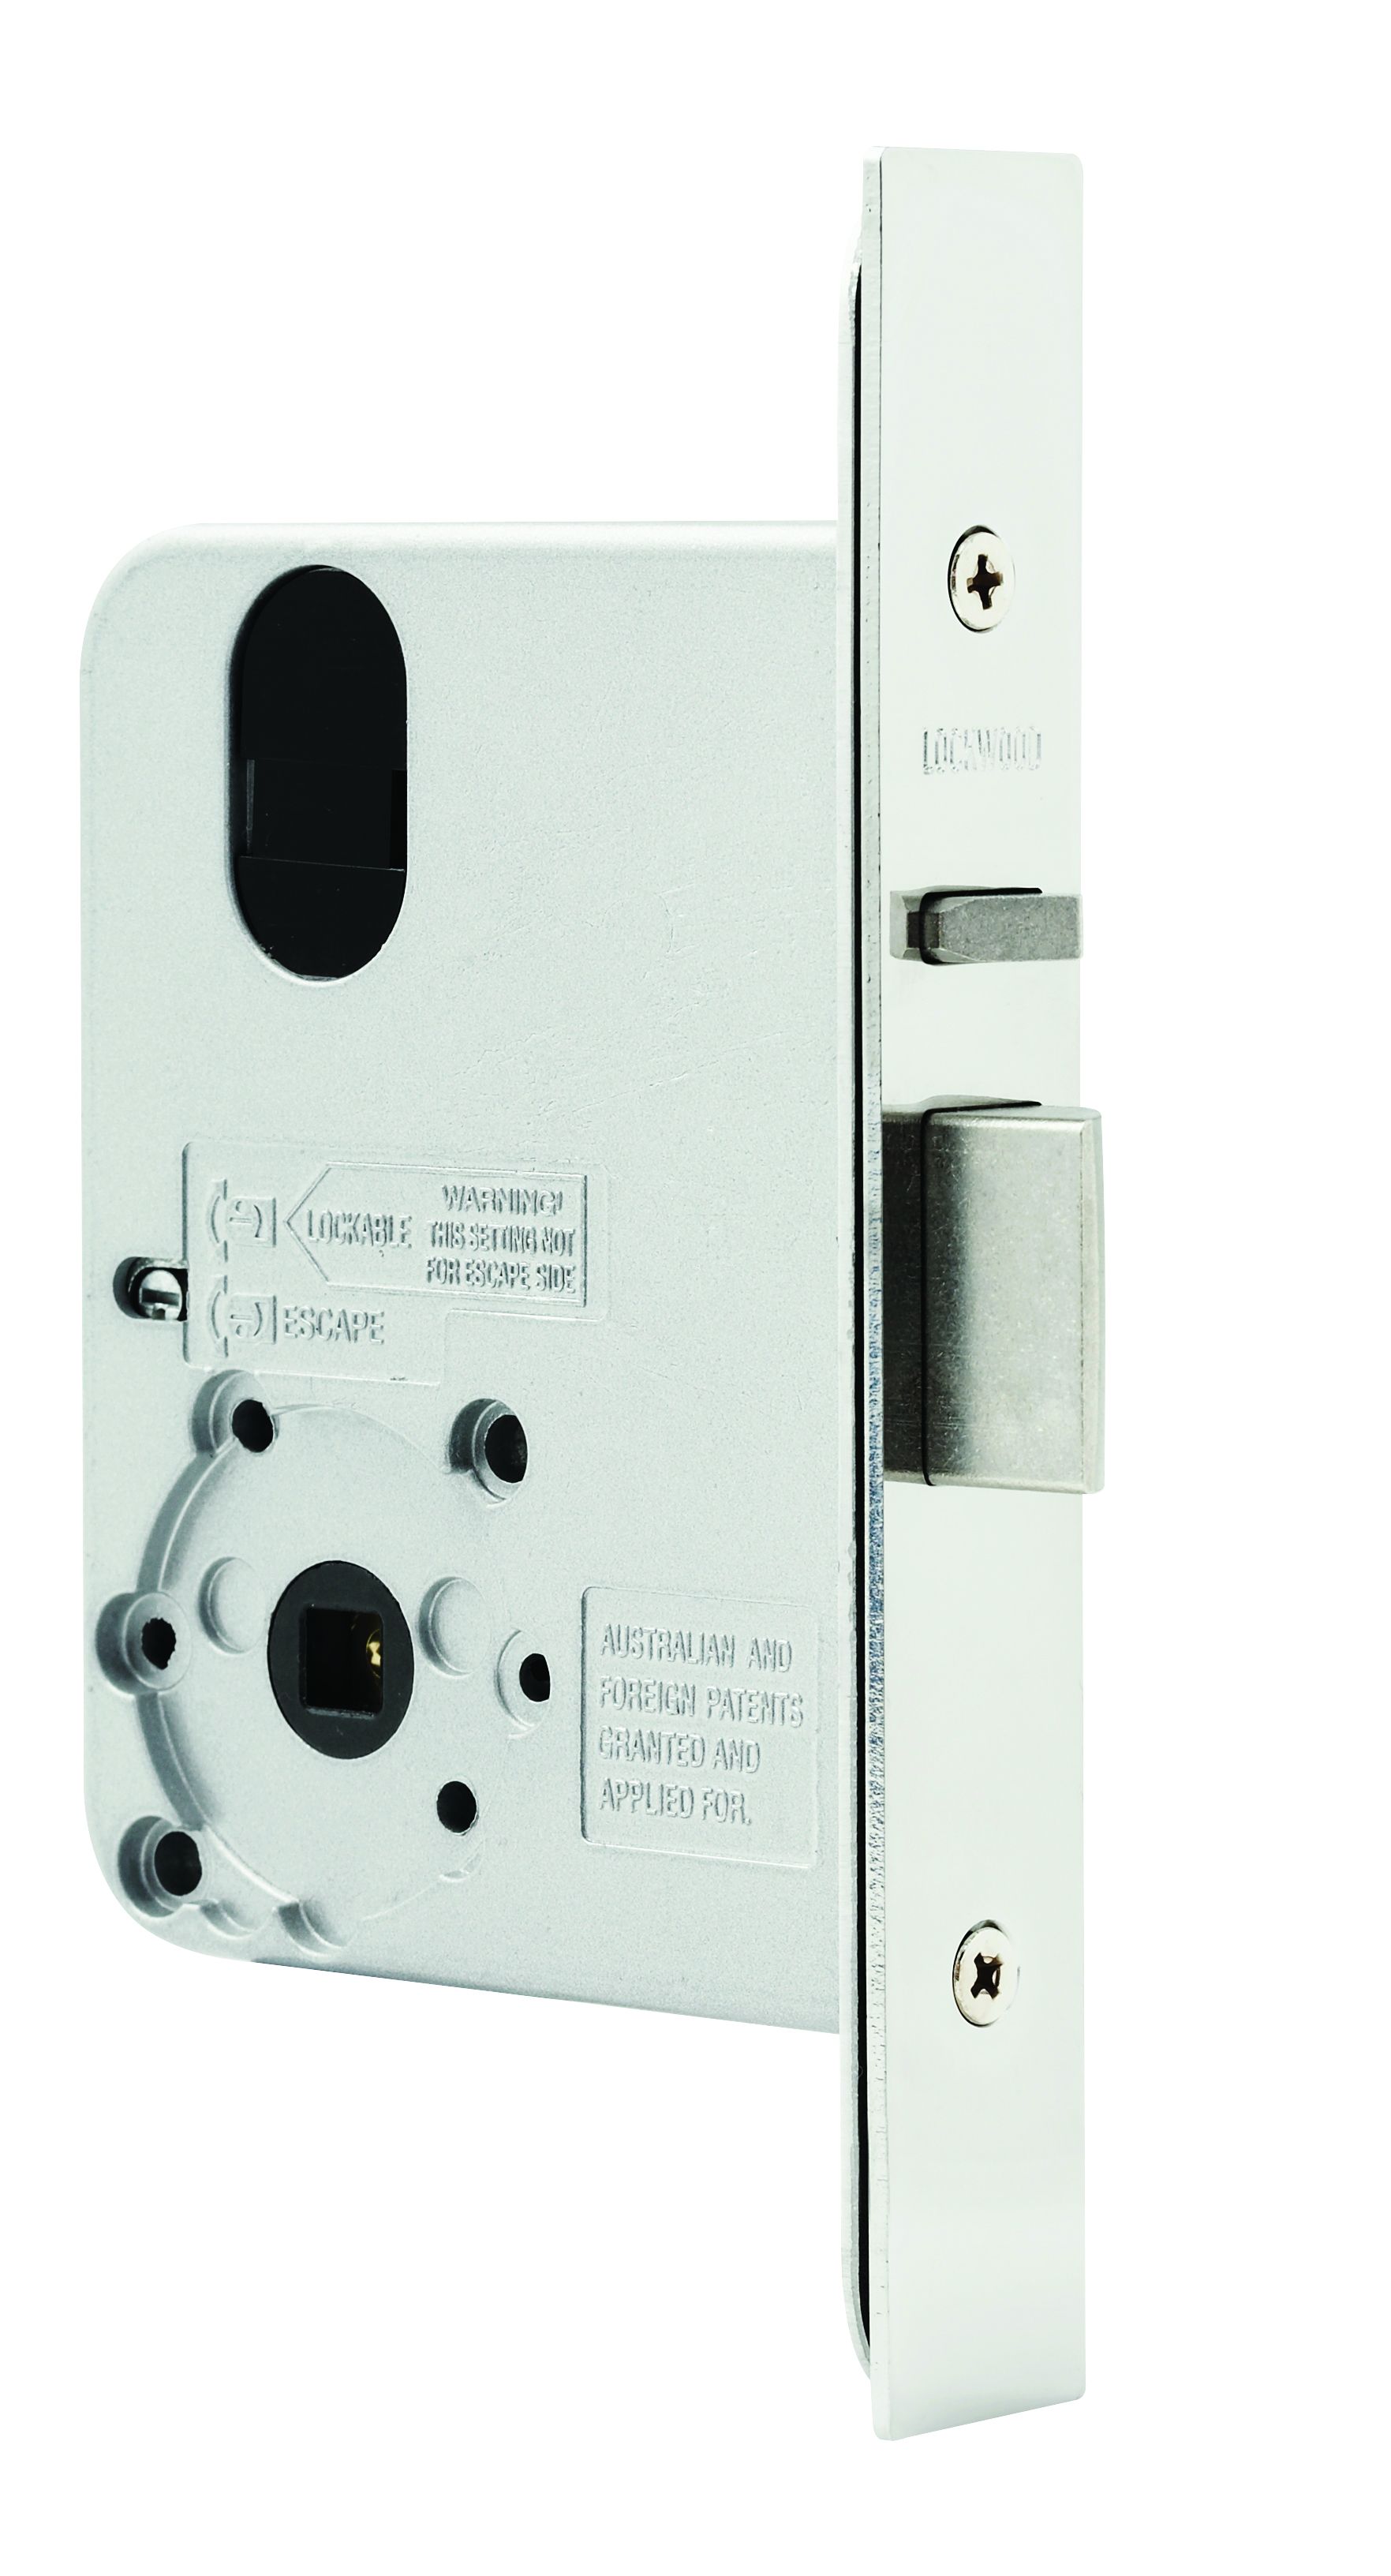 ASSA ABLOY LOCKWOOD 3570 SERIES ELECTRIC MORTICE LOCK MONITORED FAIL SECURE(PTO) 12-24VDC